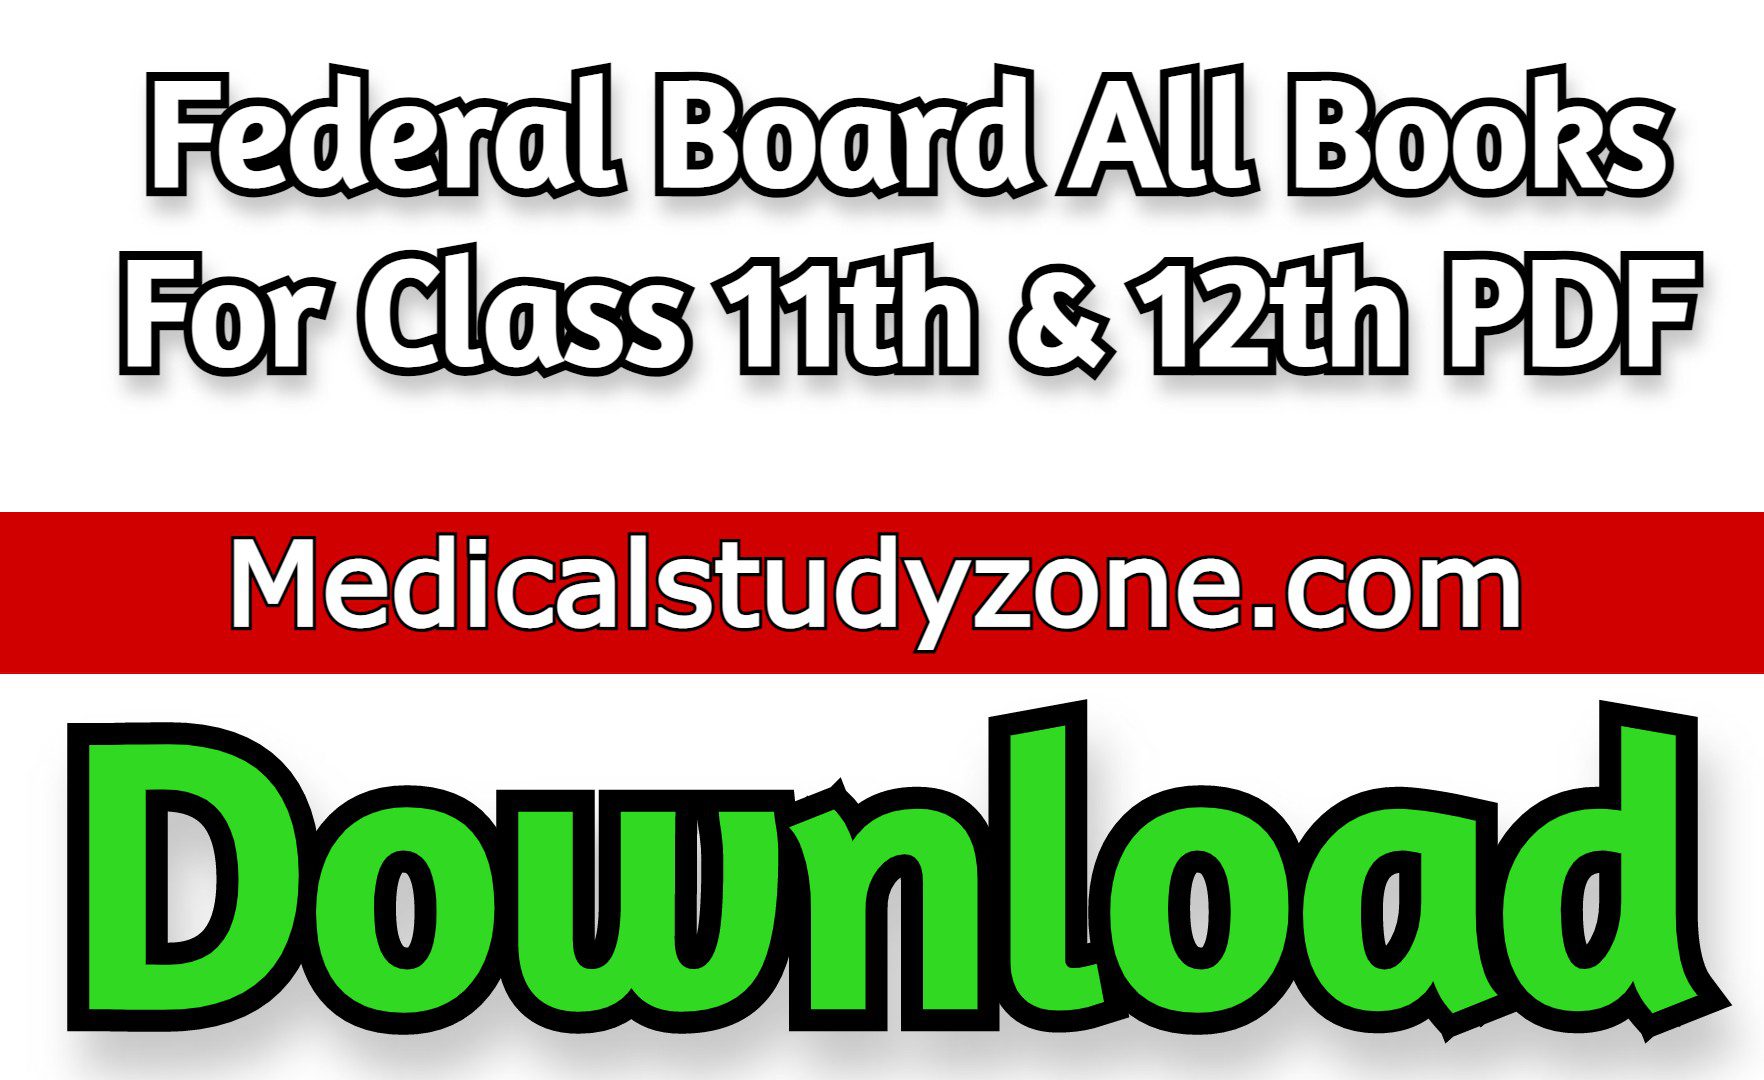 Federal Board All Books For Class 11th & 12th PDF 2021 Free Download